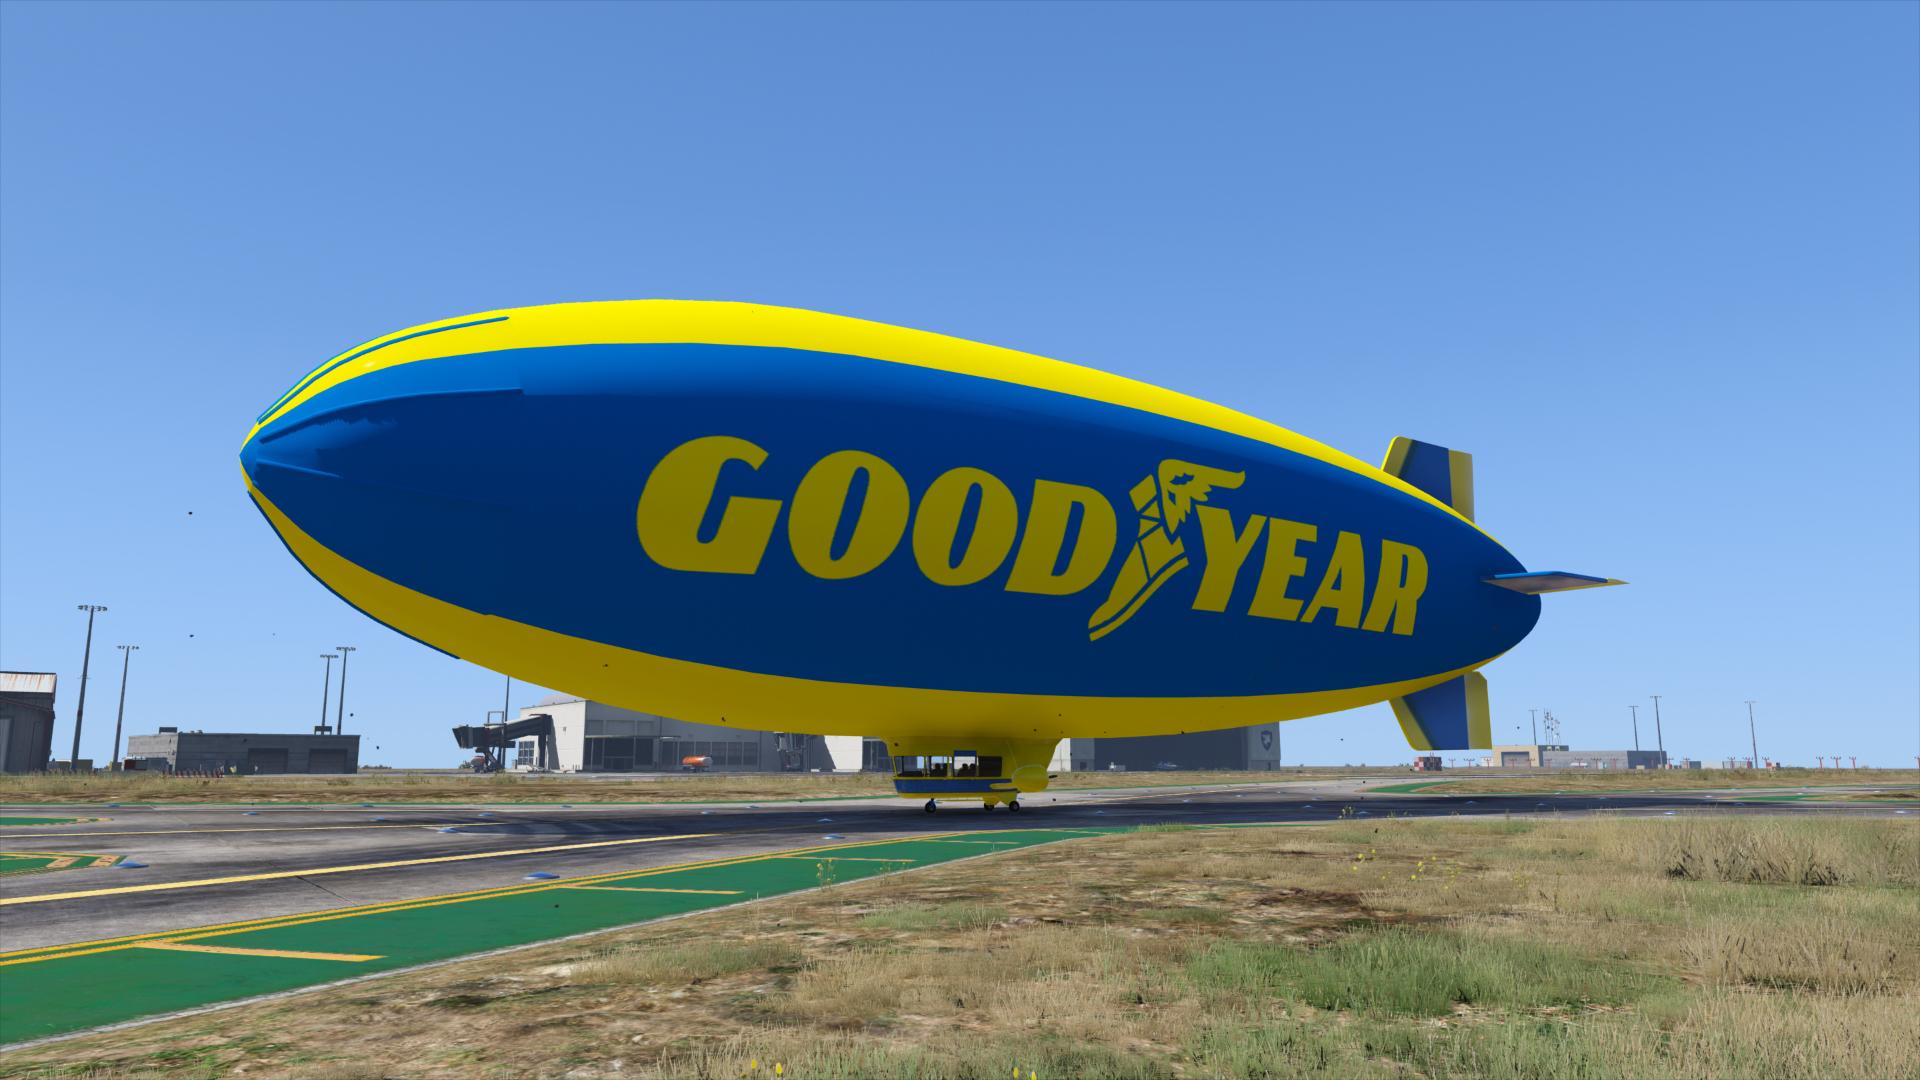 Goodyear Blimp, Page 5